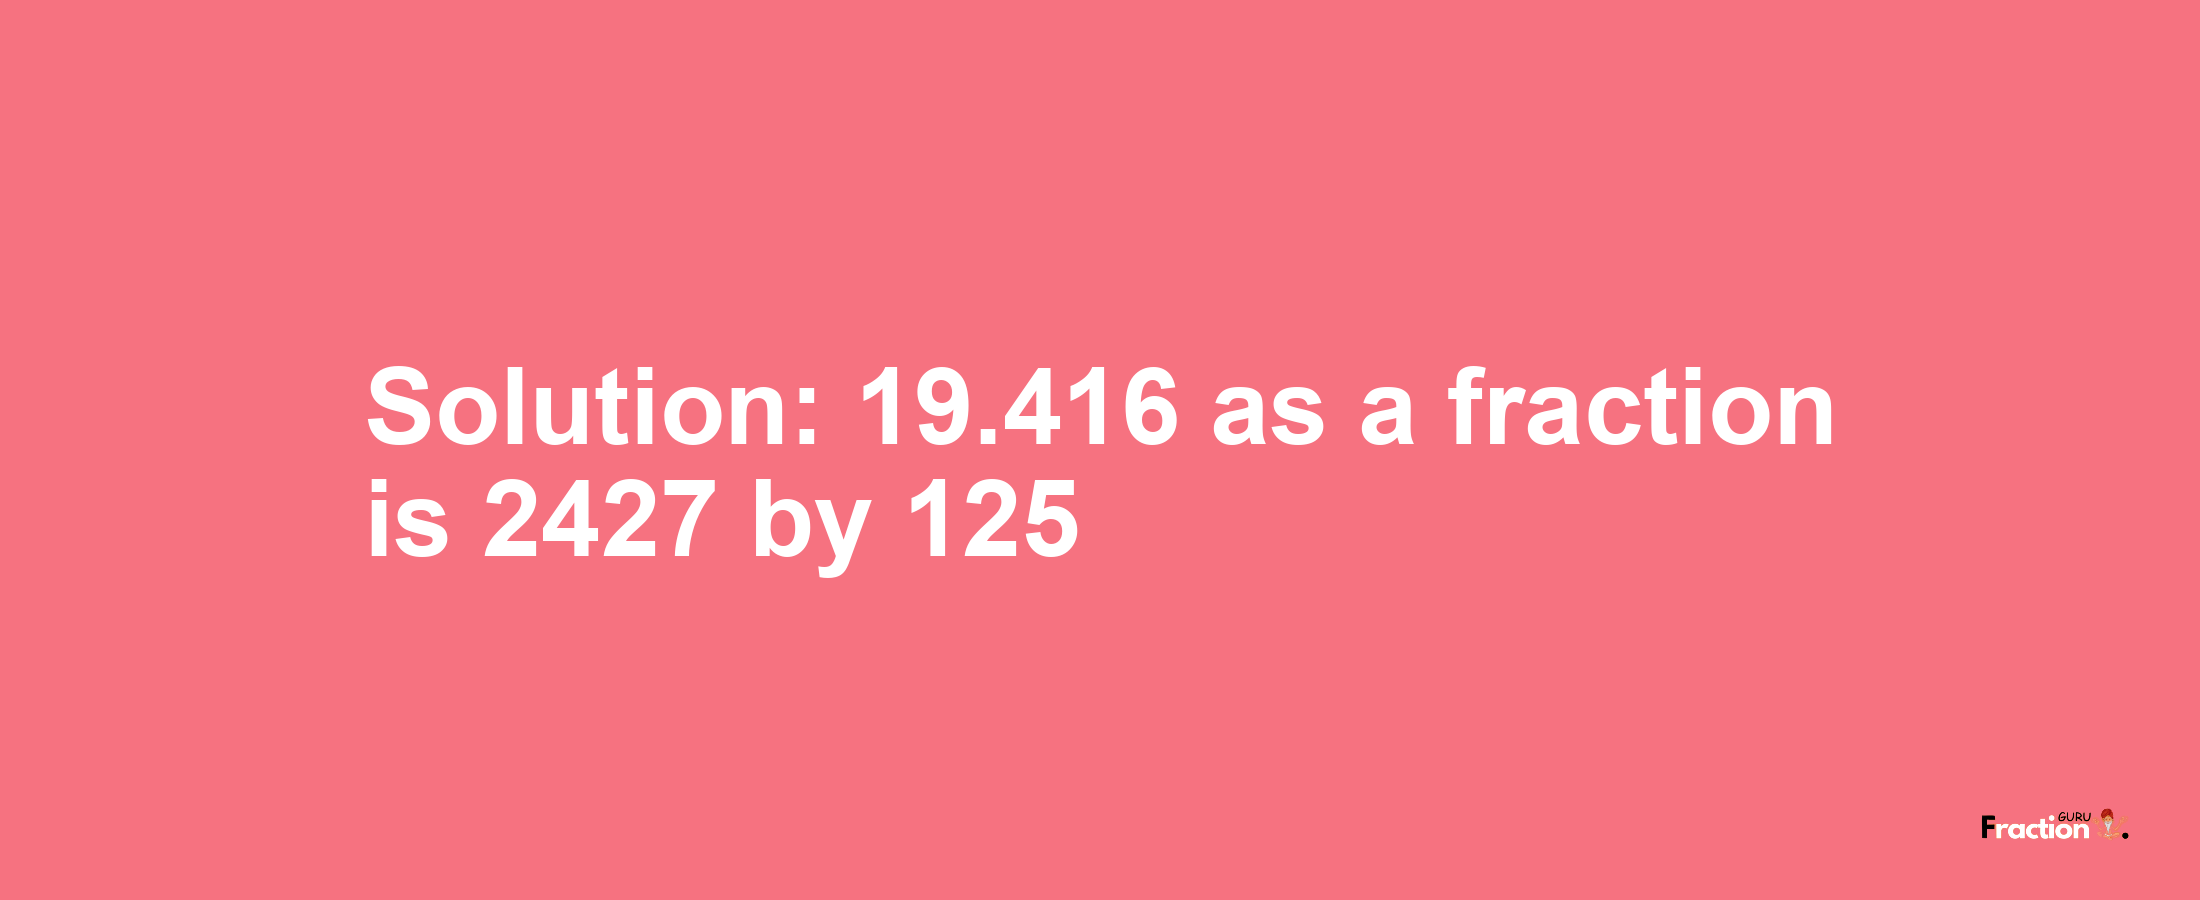 Solution:19.416 as a fraction is 2427/125